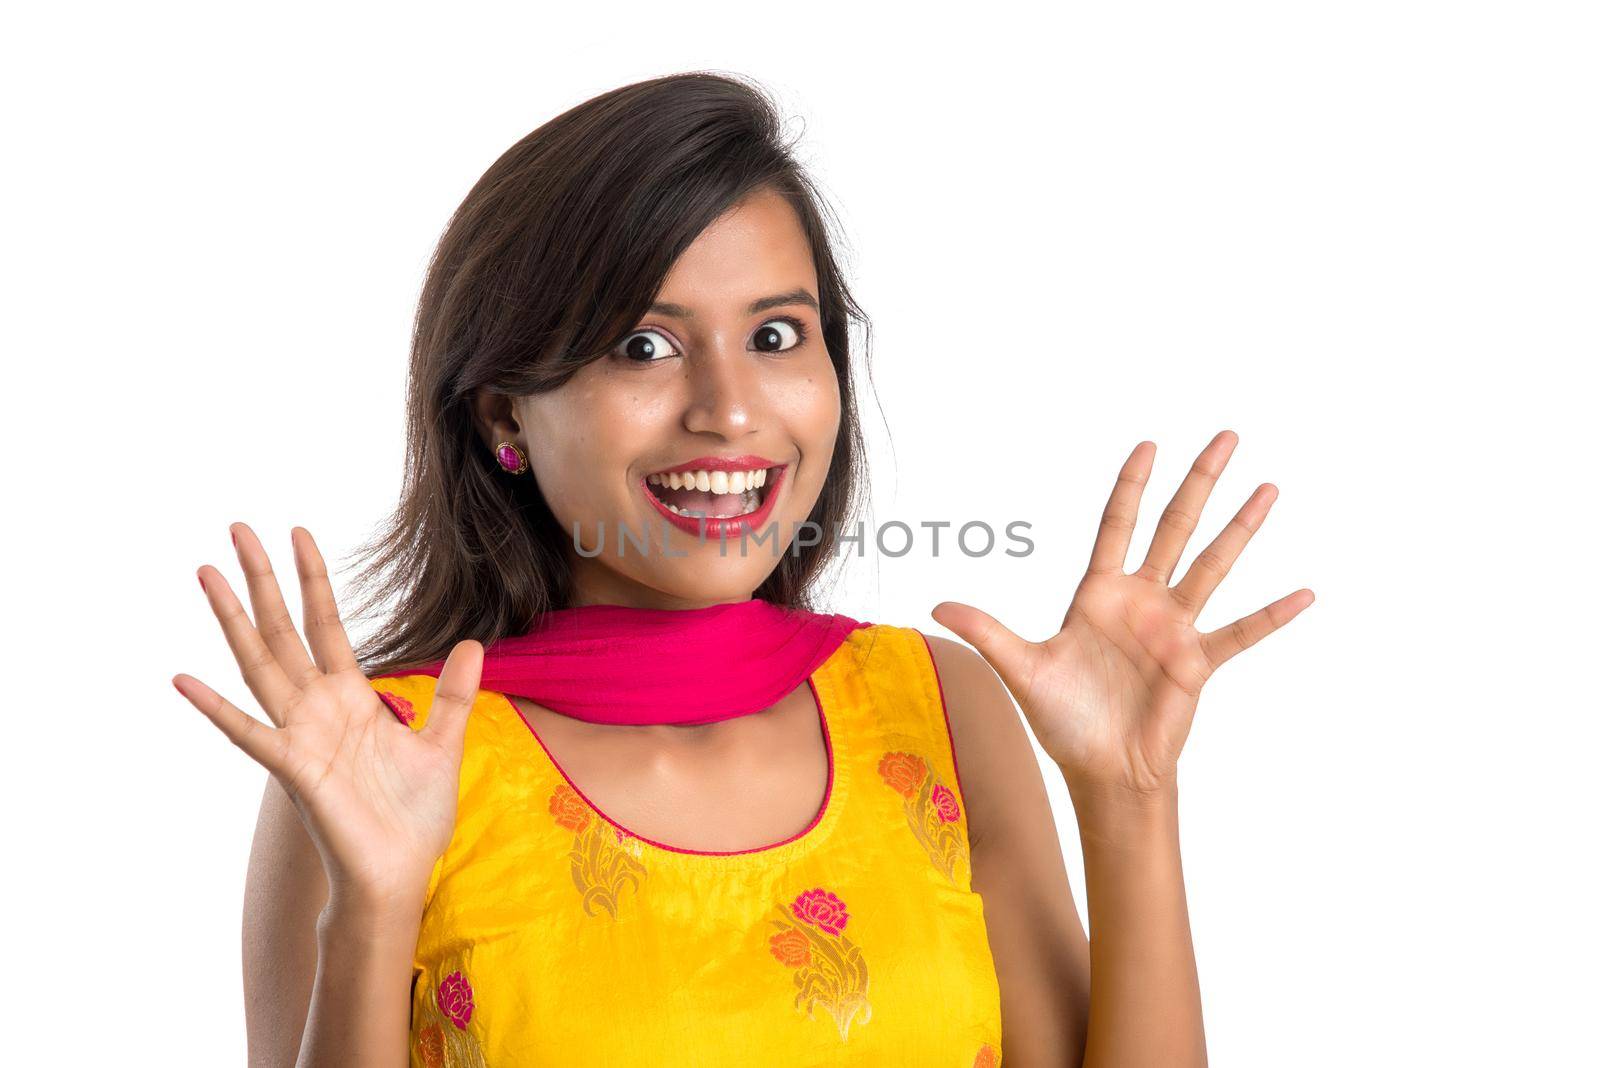 Beautiful Indian Traditional Girl Posing On White Background Royalty Free Stock Image